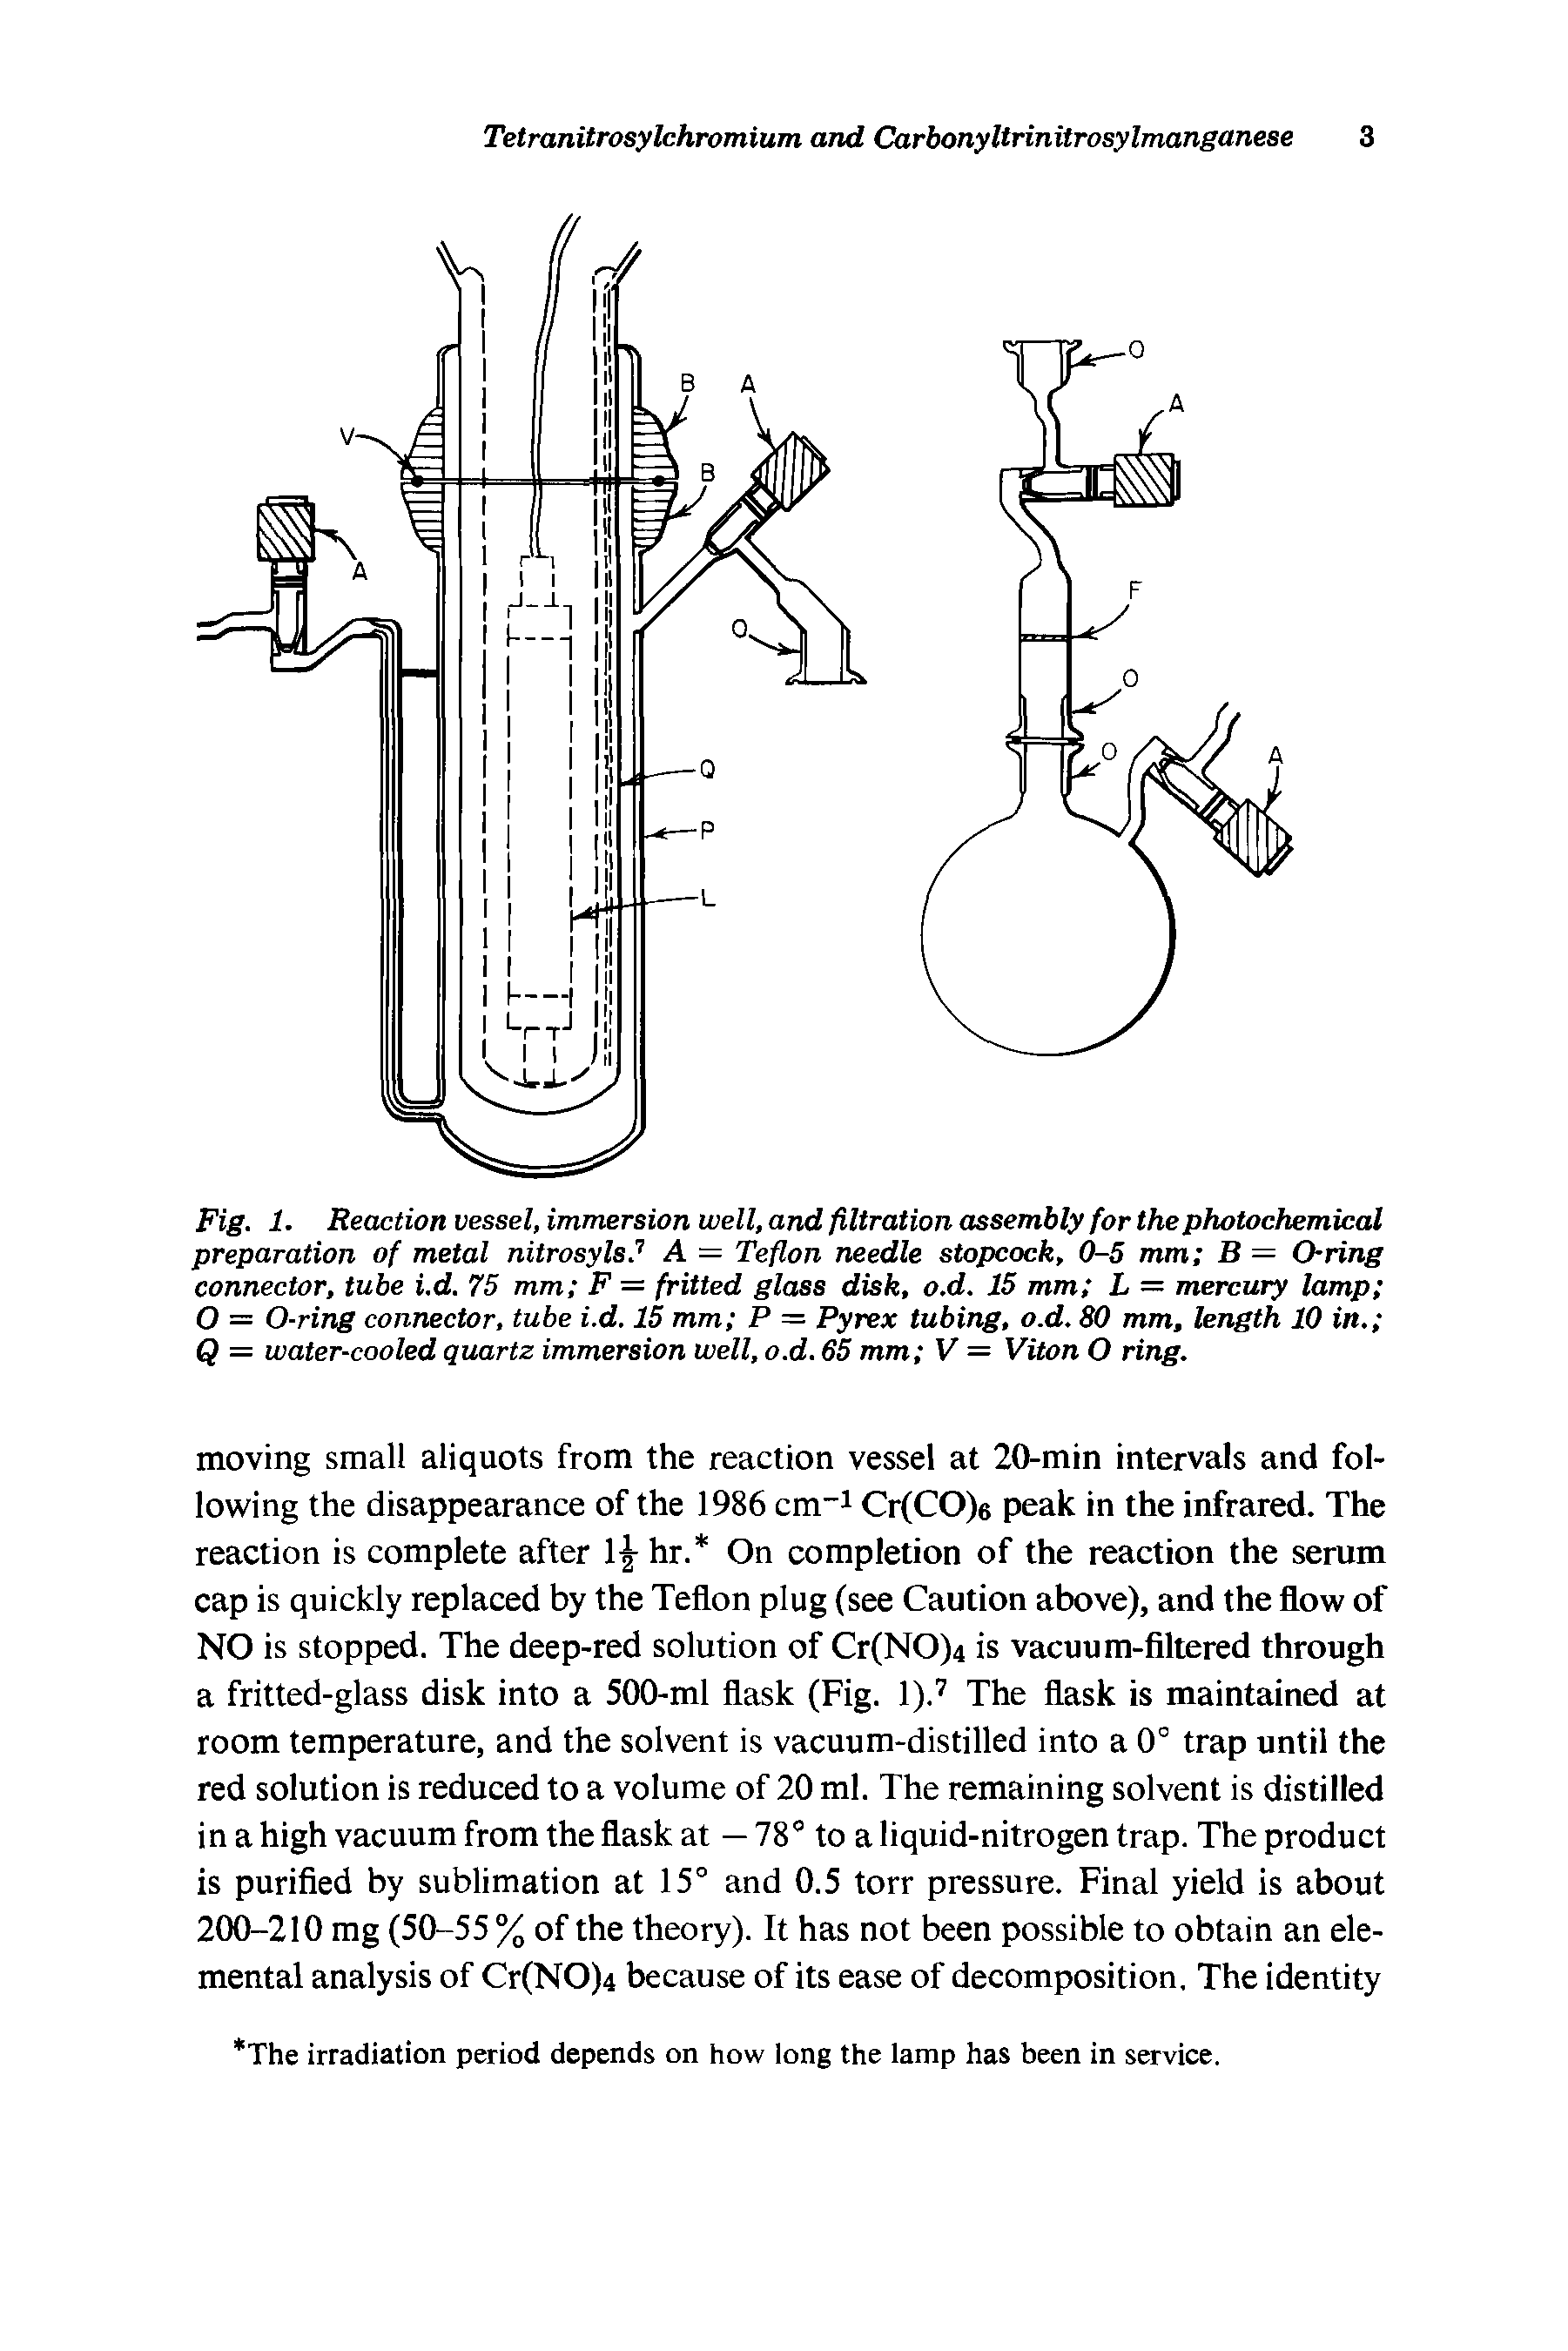 Fig. 1. Reaction vessel, immersion well, and filtration assembly for the photochemical preparation of metal nitrosyls. A = Teflon needle stopcock, 0-5 mm B = O-ring connector, tube i.d. 75 mm F = fritted glass disk, o.d. 15 mm L = mercury lamp O = O-ring connector, tube i.d. 15 mm P = Pyrex tubing, o.d, 80 mm, length 10 in. Q = water-cooled quartz immersion well, o.d. 65 mm V = Viton O ring.